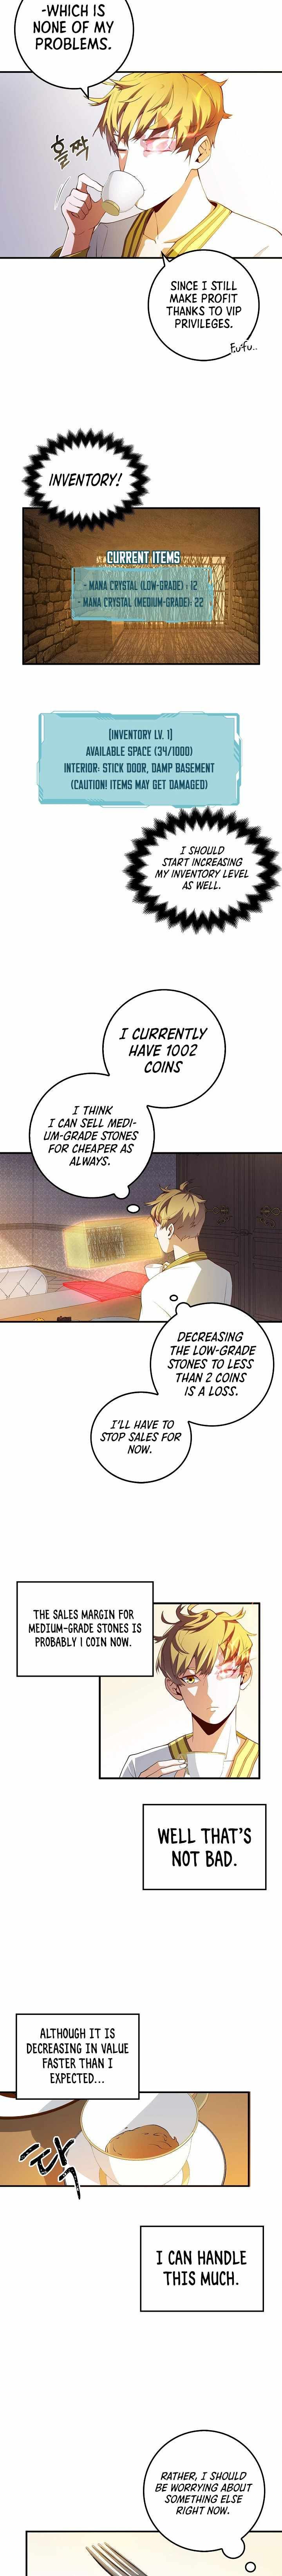 The Lords Coins Arent Decreasing Chapter 10 Page 2